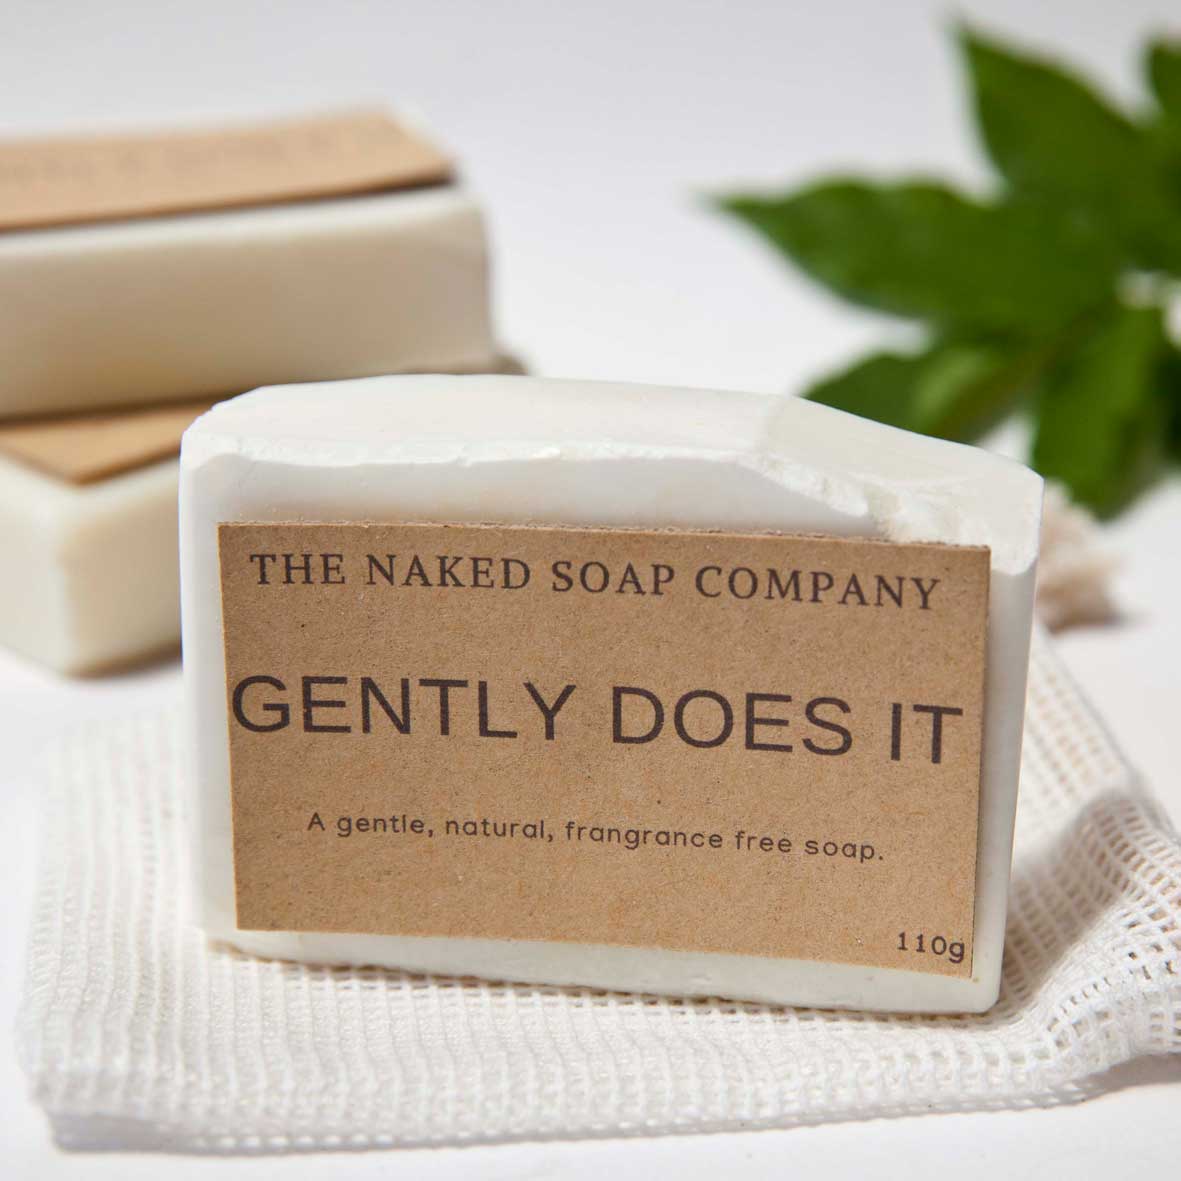 Gently does it all natural plastic free soap bar. A fragrance free soap. Diminish.